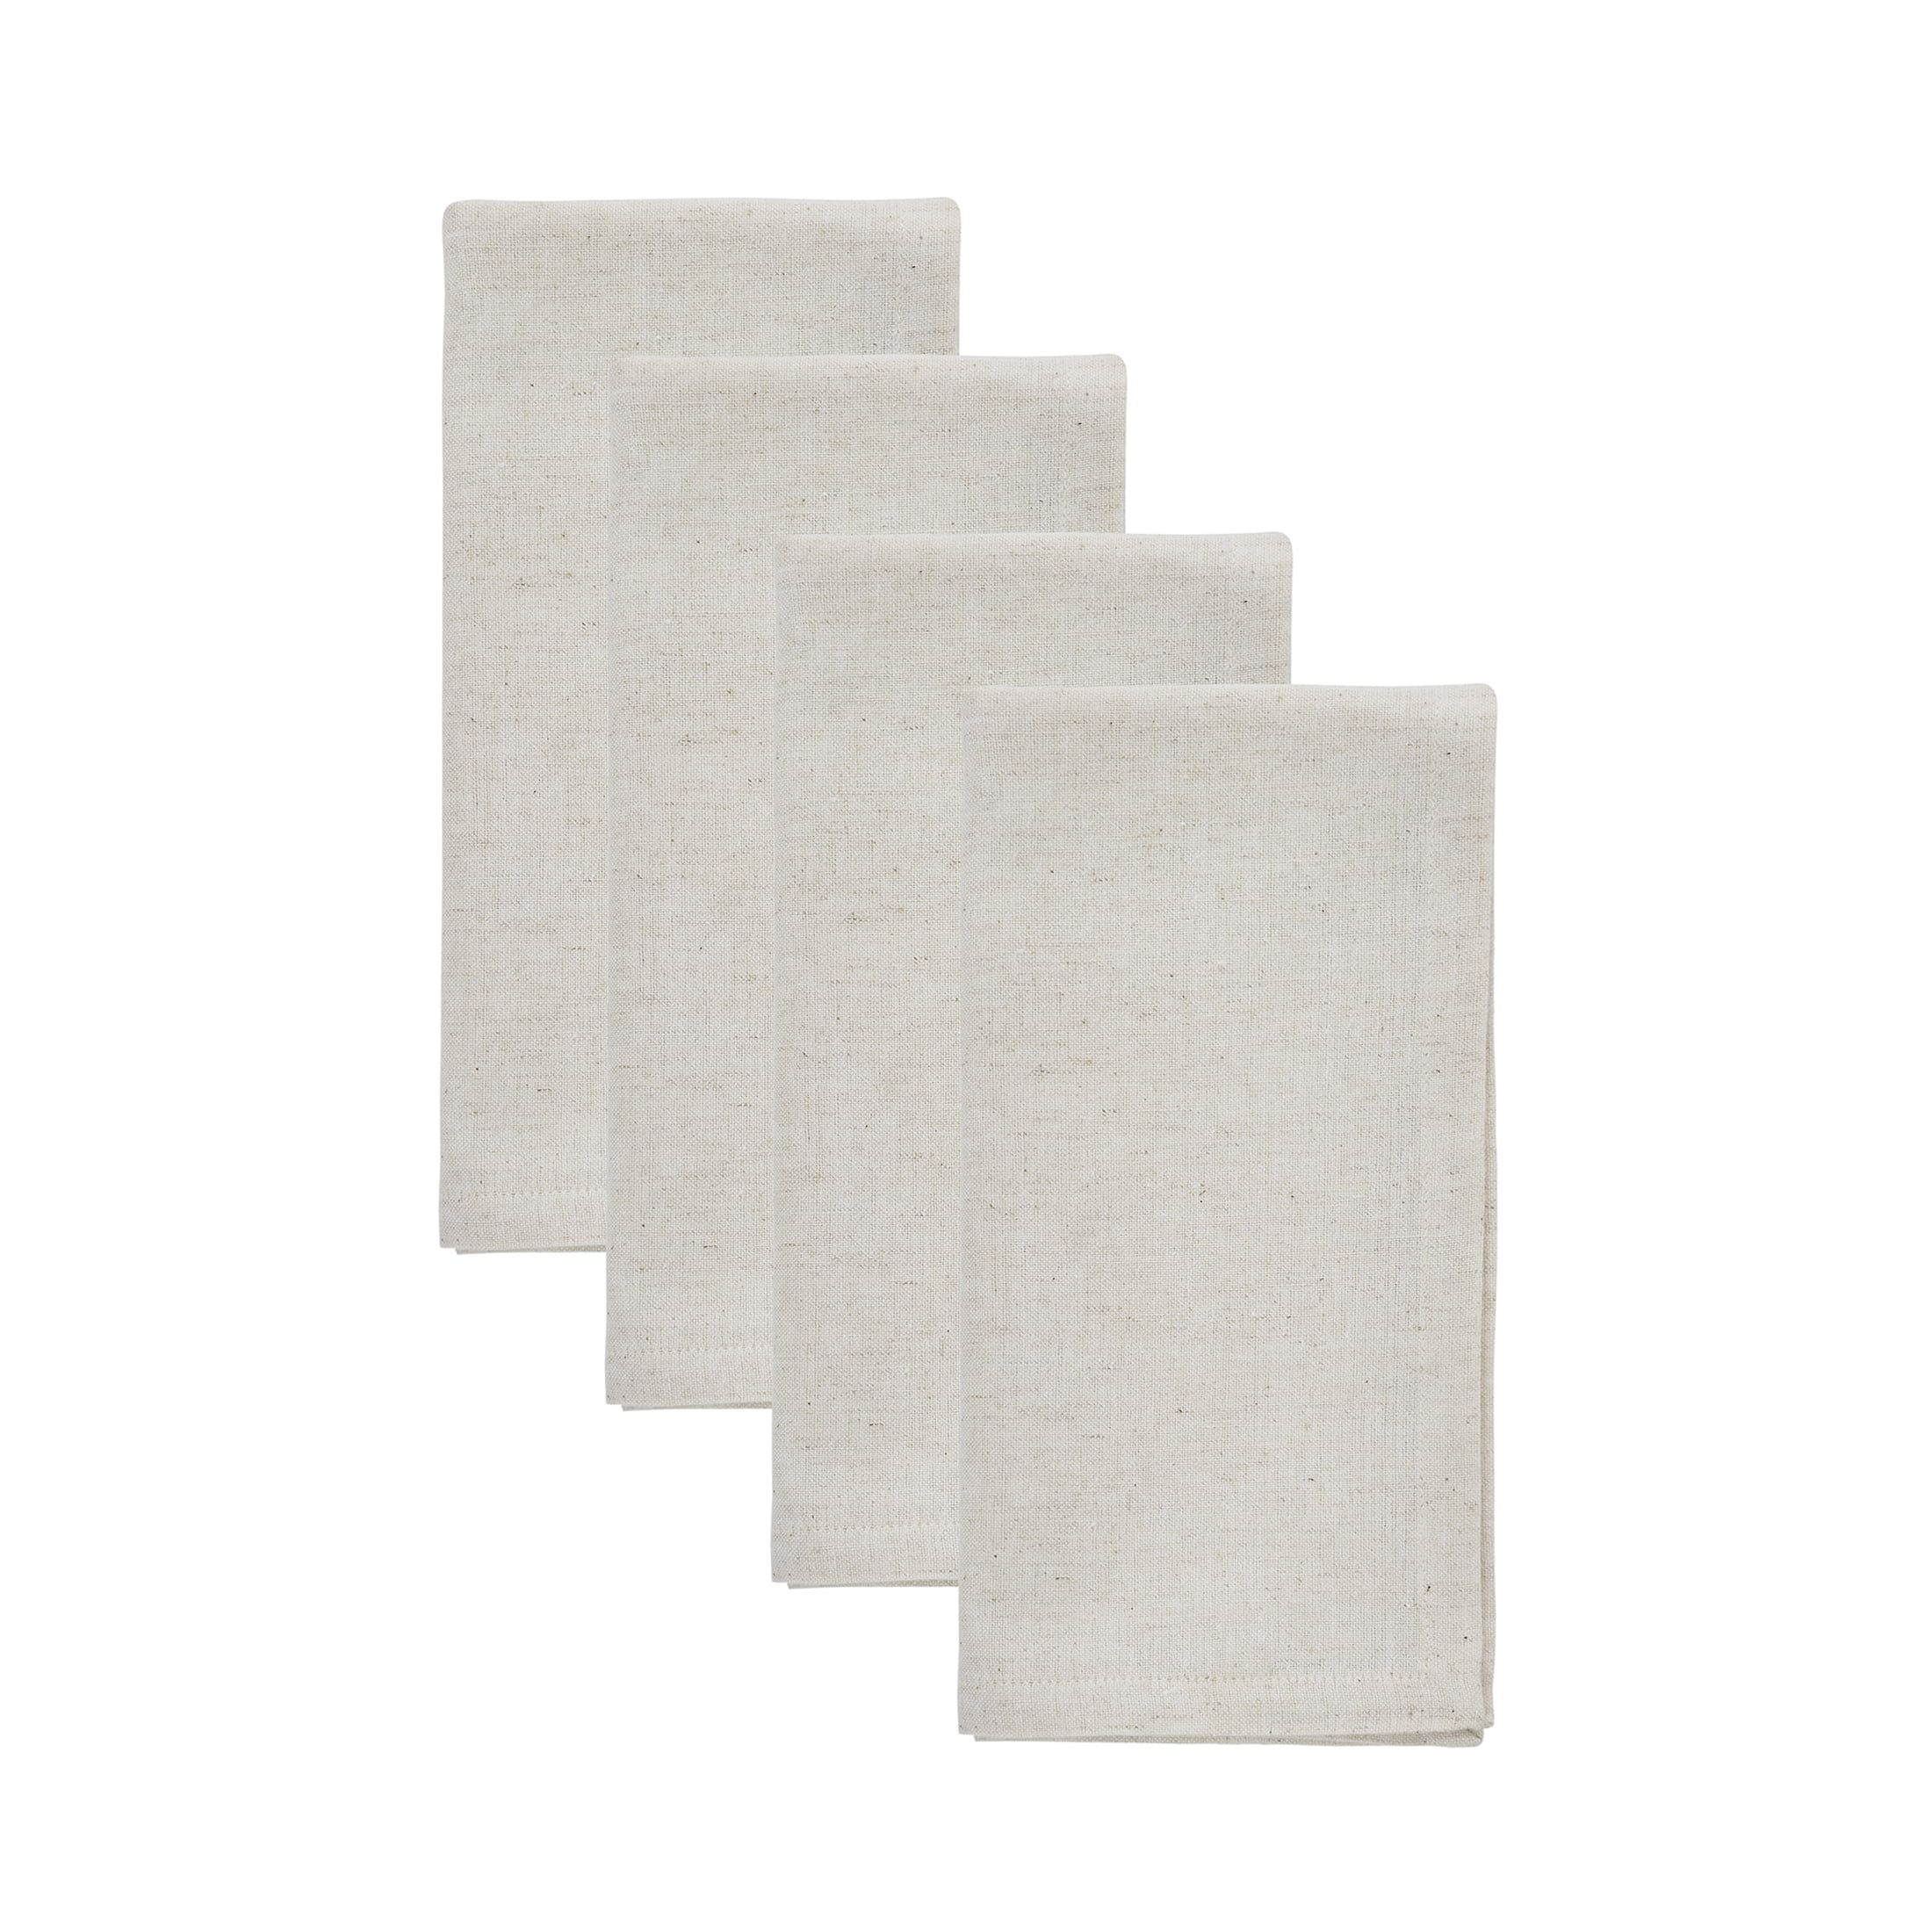 My Texas House Solid Cloth Dinner Table Napkins, 4 Pieces, Beige | Walmart (US)